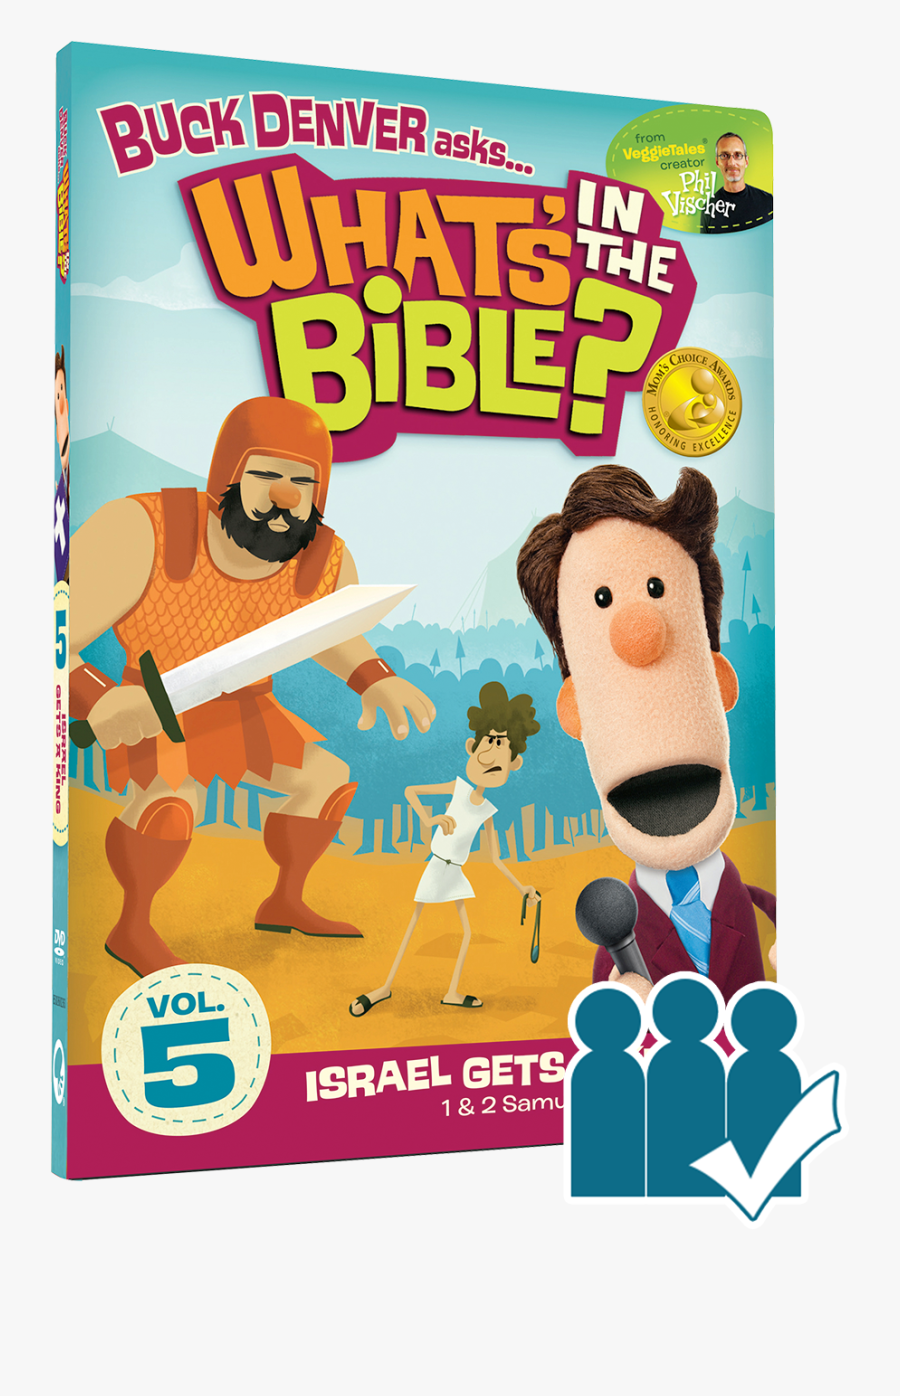 5 Israel Gets A King - Buck Denver Asks What's In The Bible, Transparent Clipart